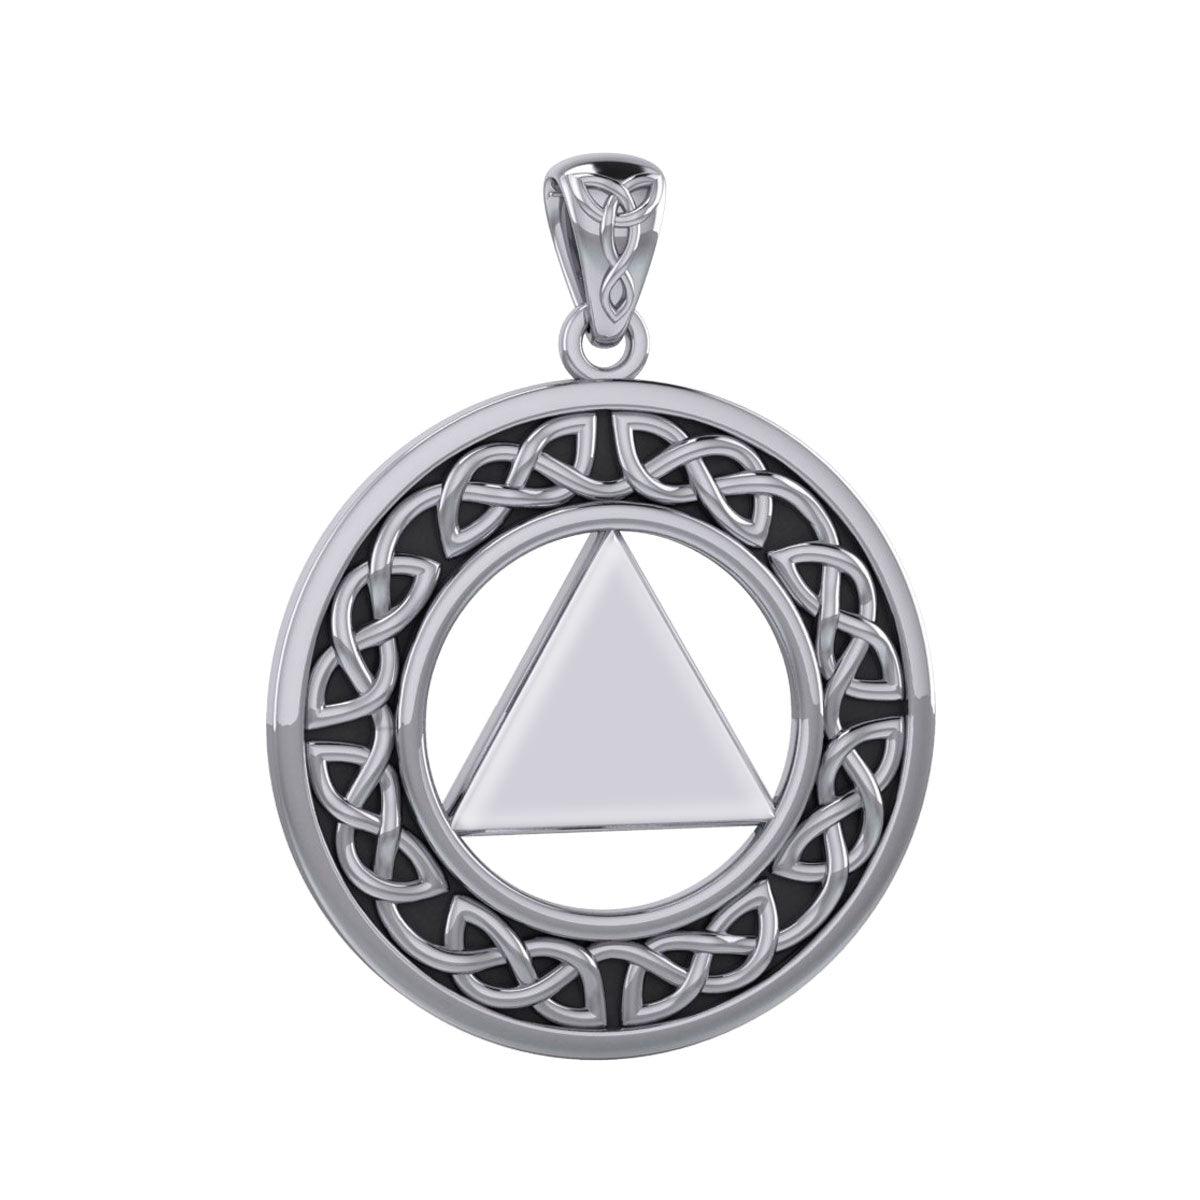 Celtic Knots Silver AA Symbol Pendant TPD334 - peterstone.dropshipping